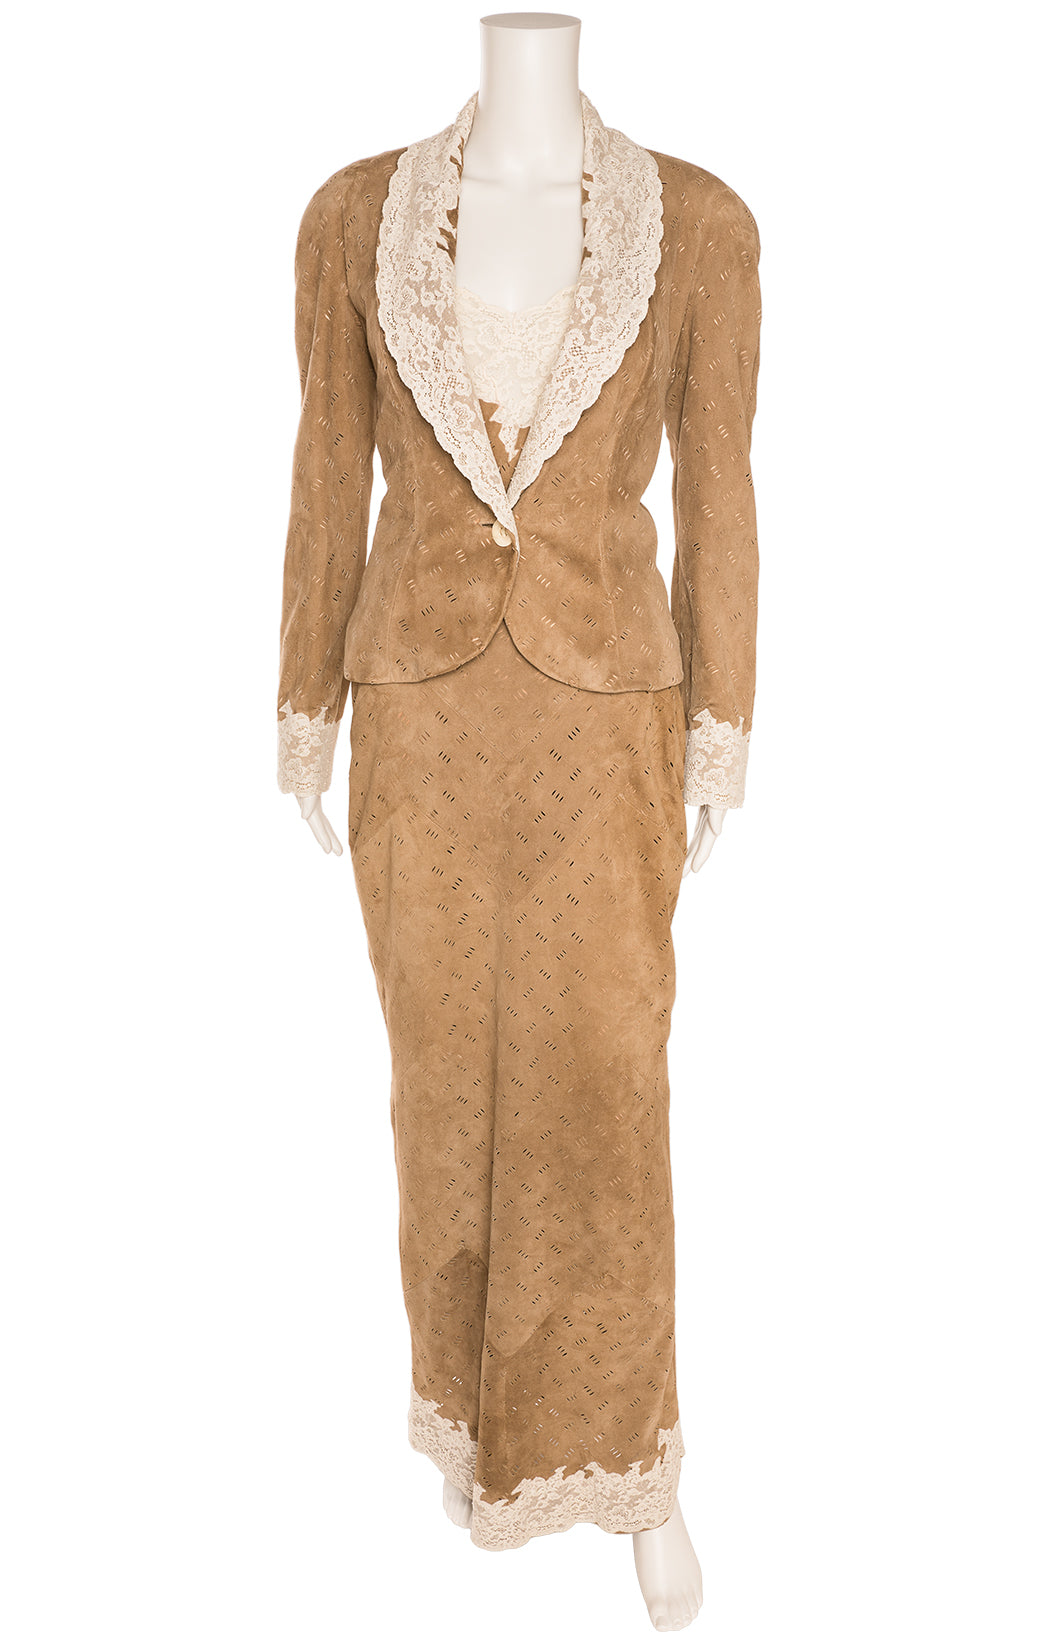 CHRISTIAN DIOR Dress and Jacket Size: US 8